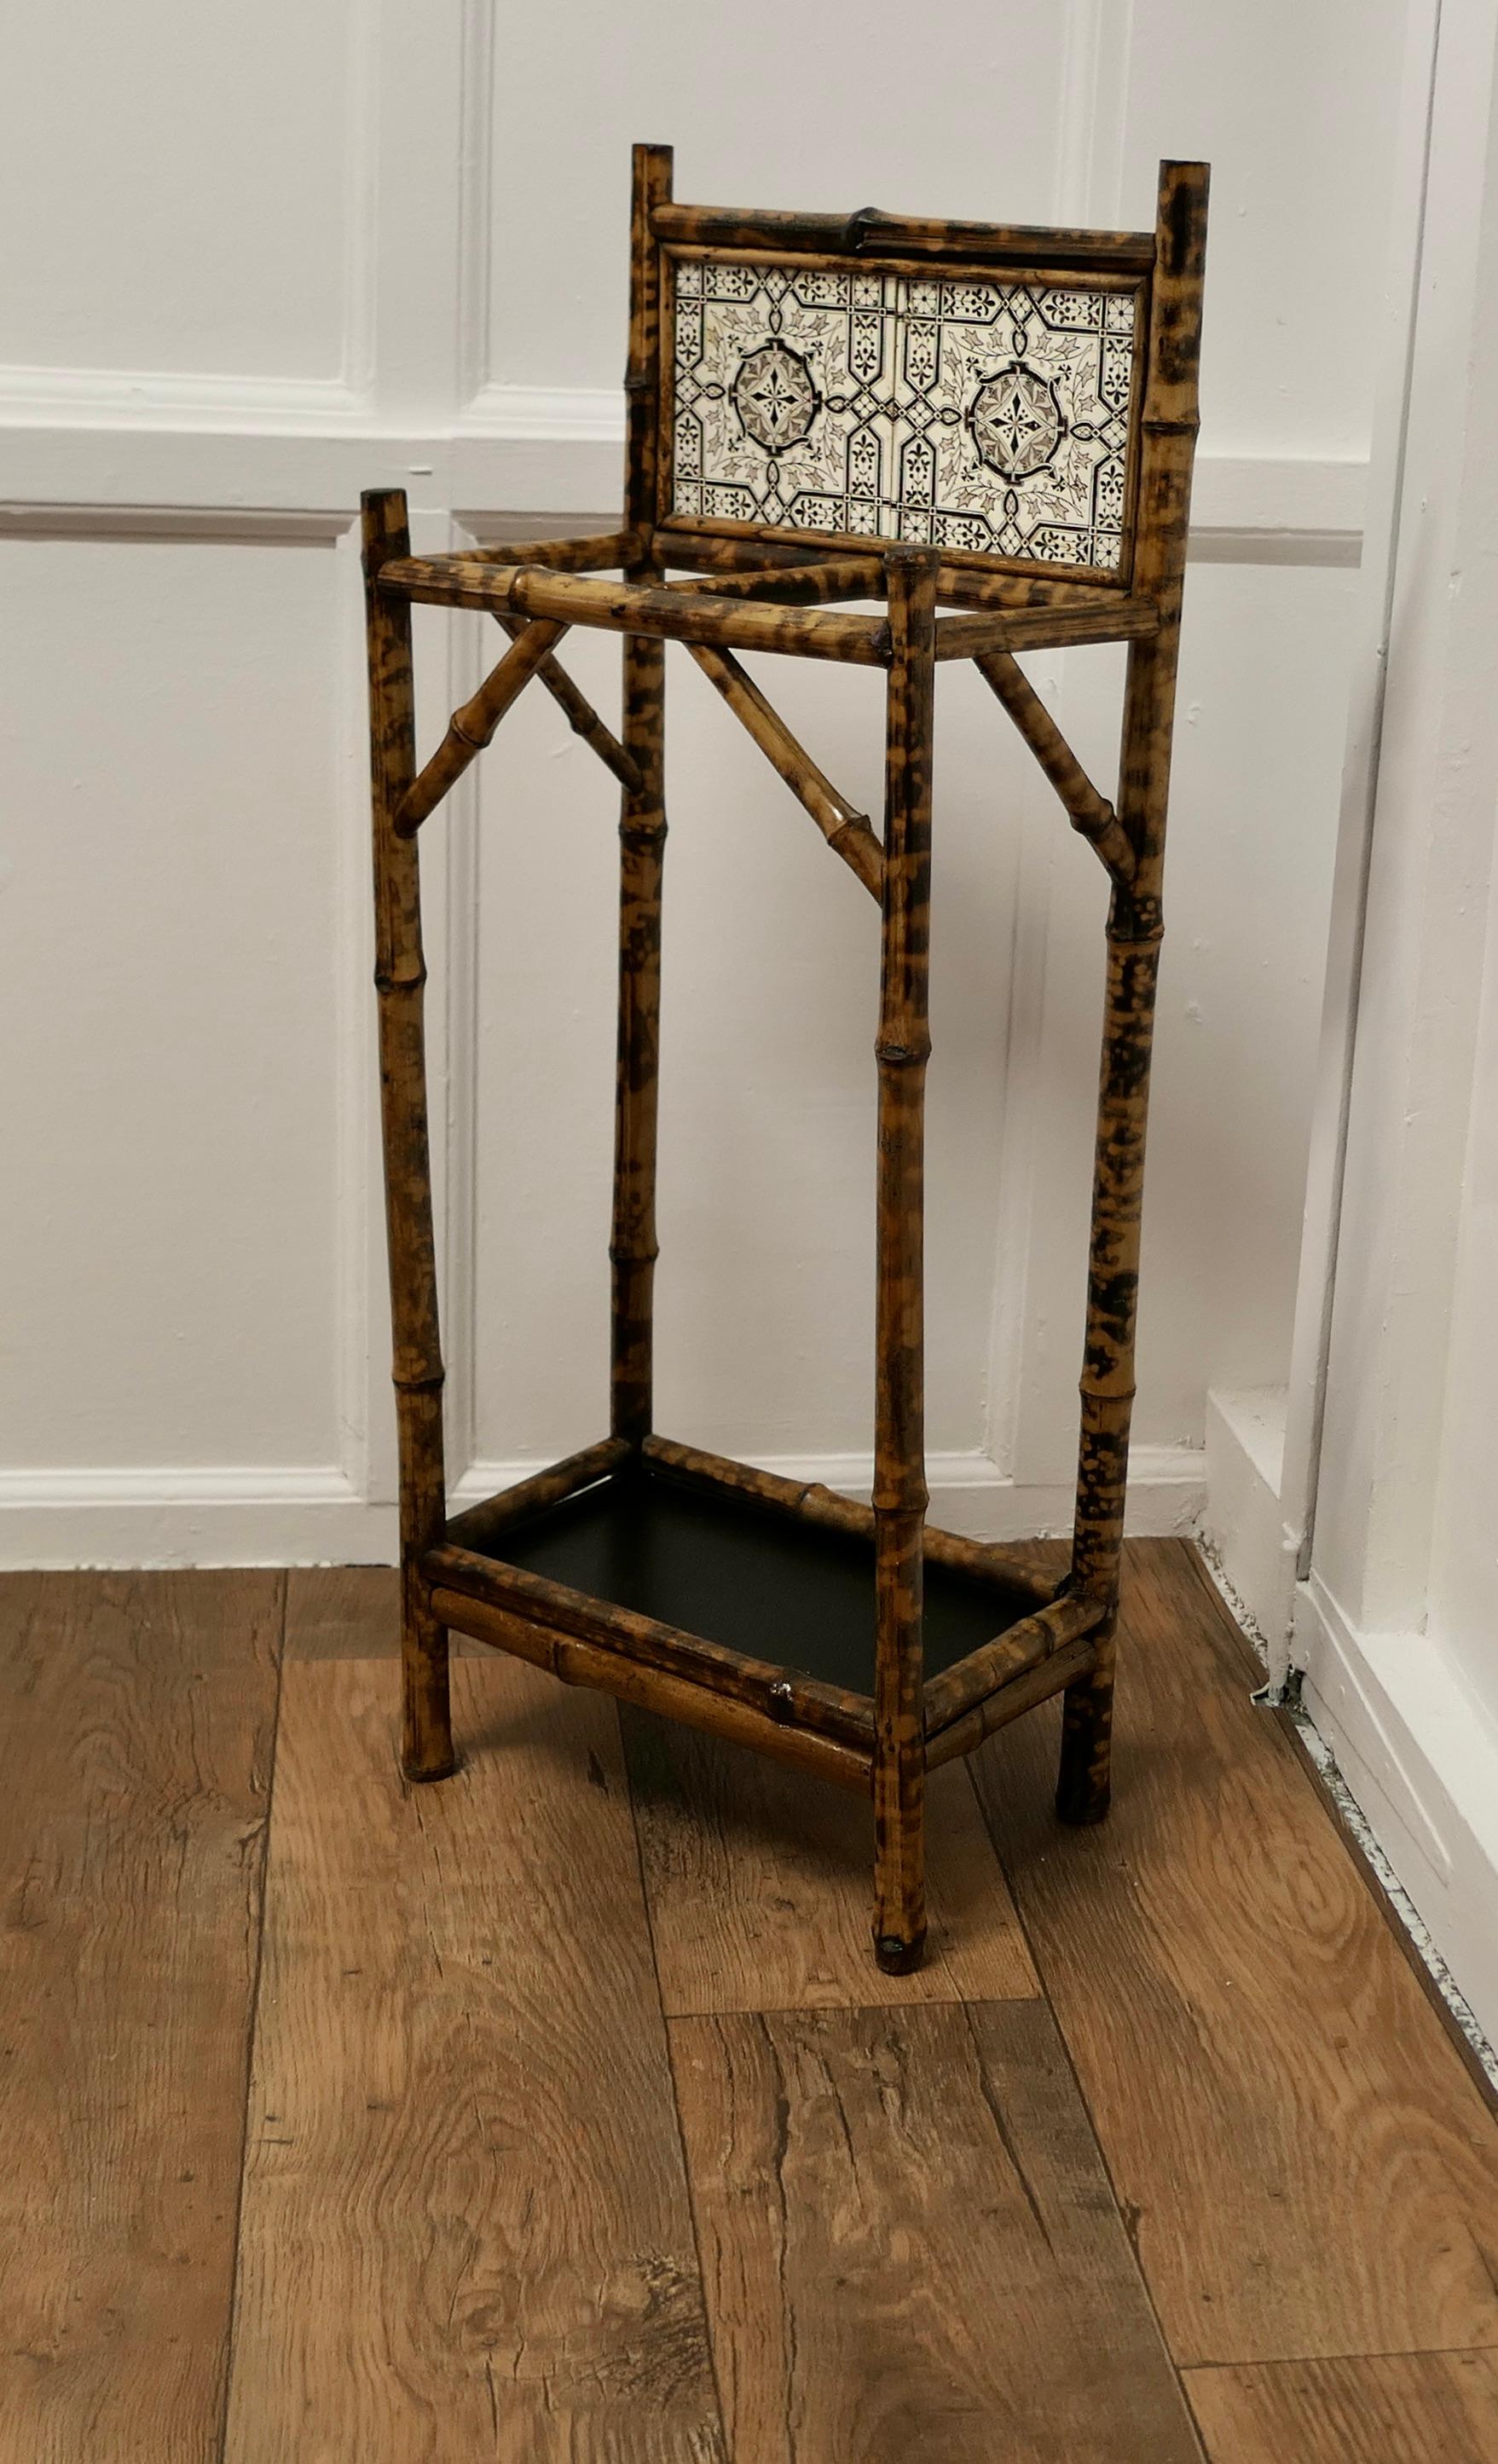 Victorian Bamboo and Tiled Stick and Umbrella stand

A charming little piece, this elegant and very useful stick and umbrella stand has 2 compartments for walking sticks
The stand is made in decorative bamboo and has a tiled back, it is in very